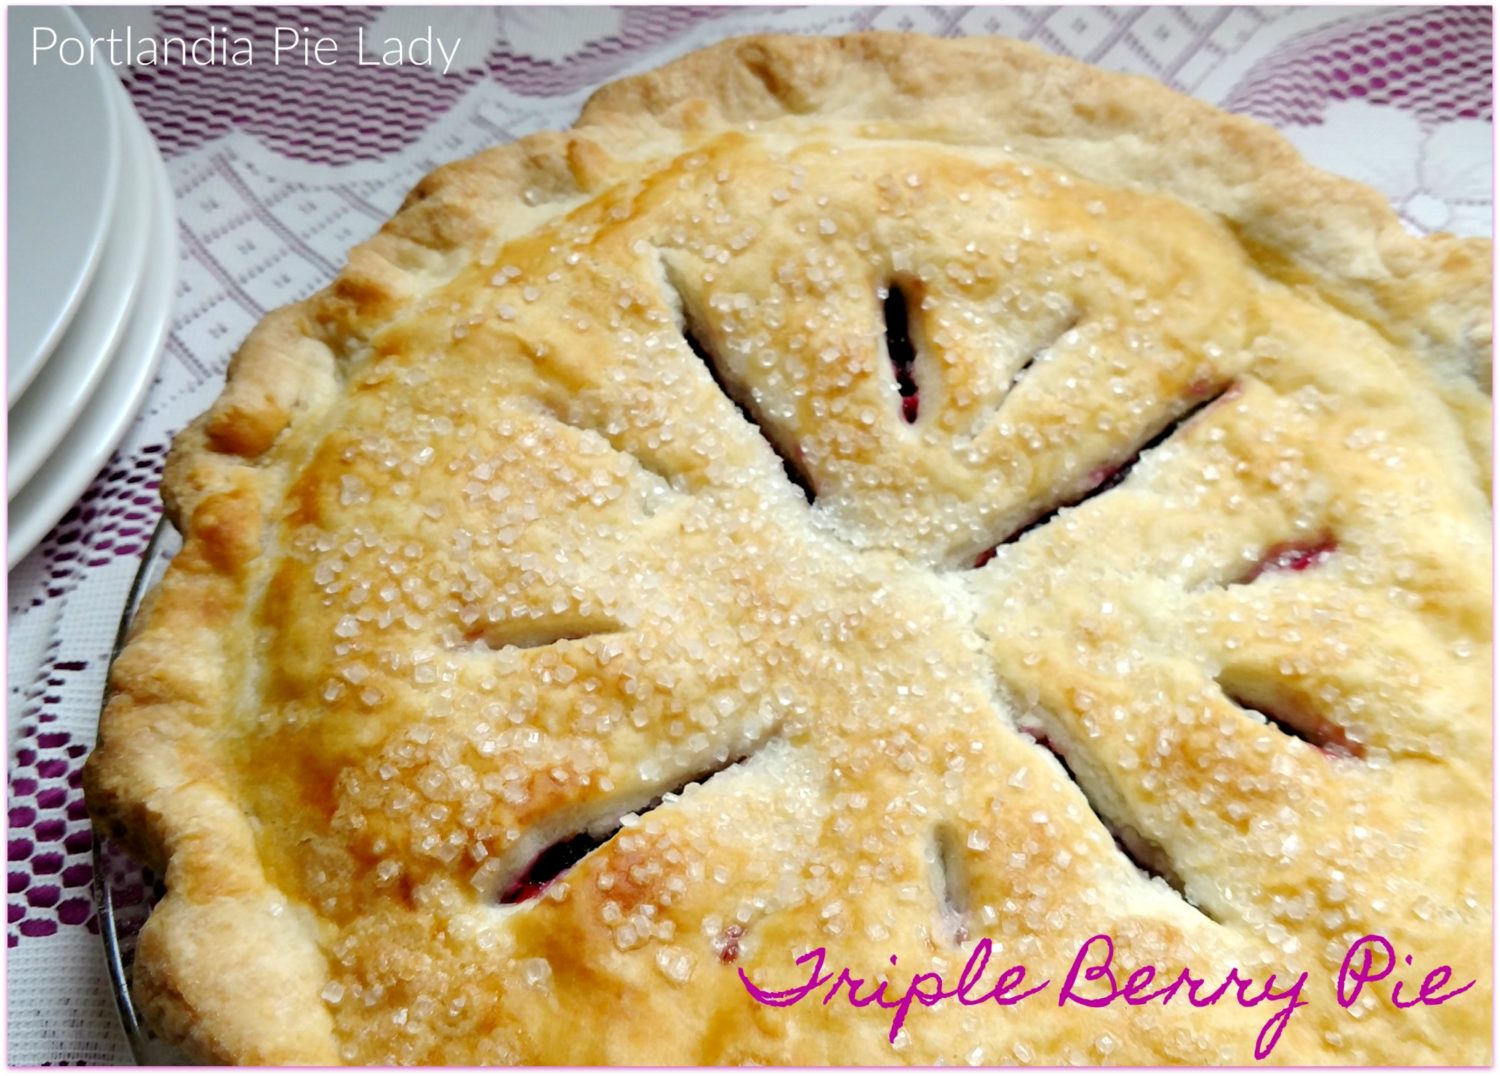 Triple Berry Pie captures that fresh-picked berry taste, perfectly baked filling in an ultra flaky crust; no watery runny berry pie ever again!